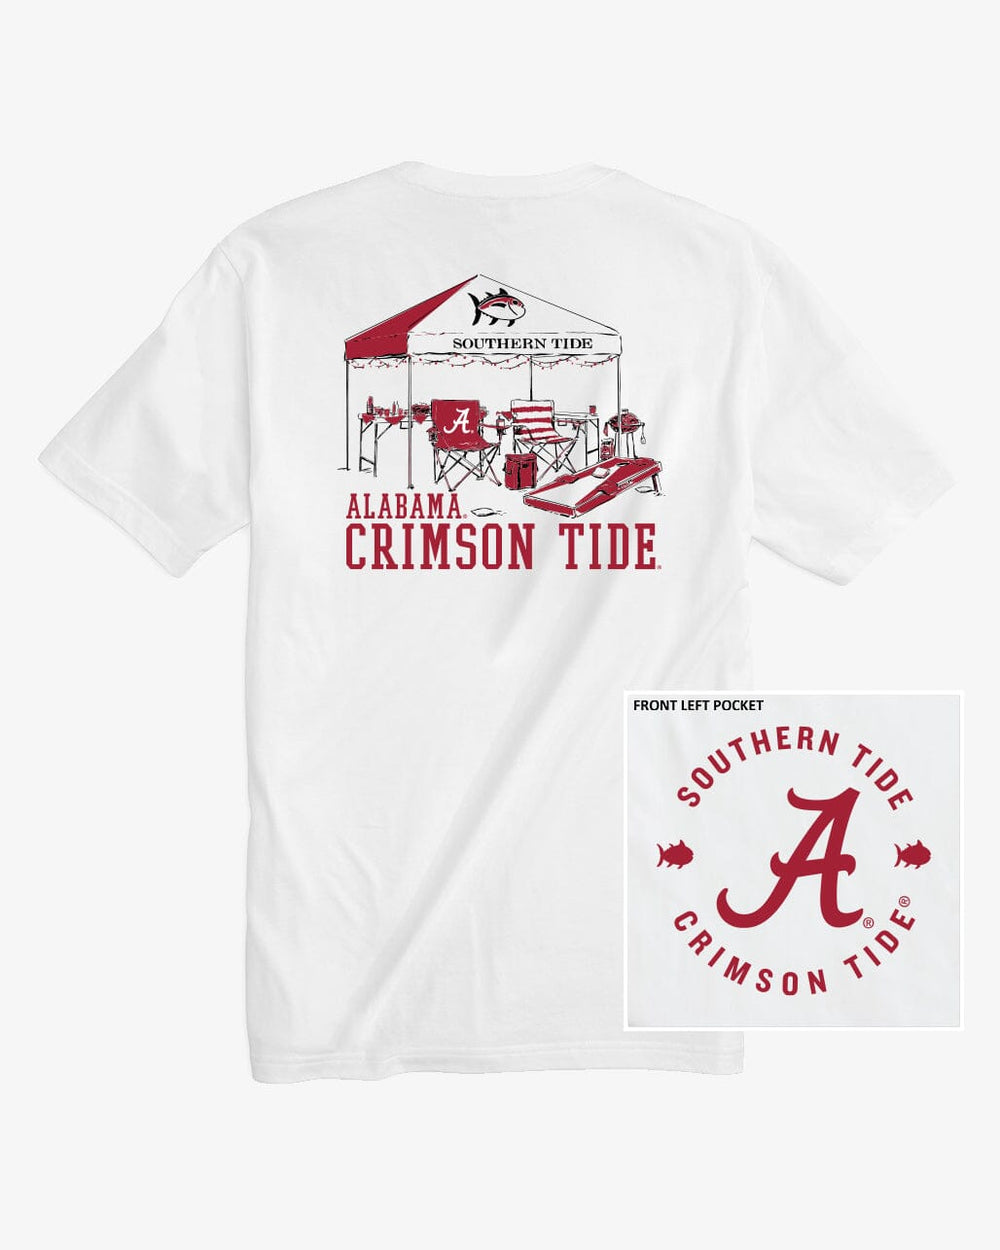 The front view of the Alabama Crimson Tide Tailgate Time T-Shirt by Southern Tide - Classic White